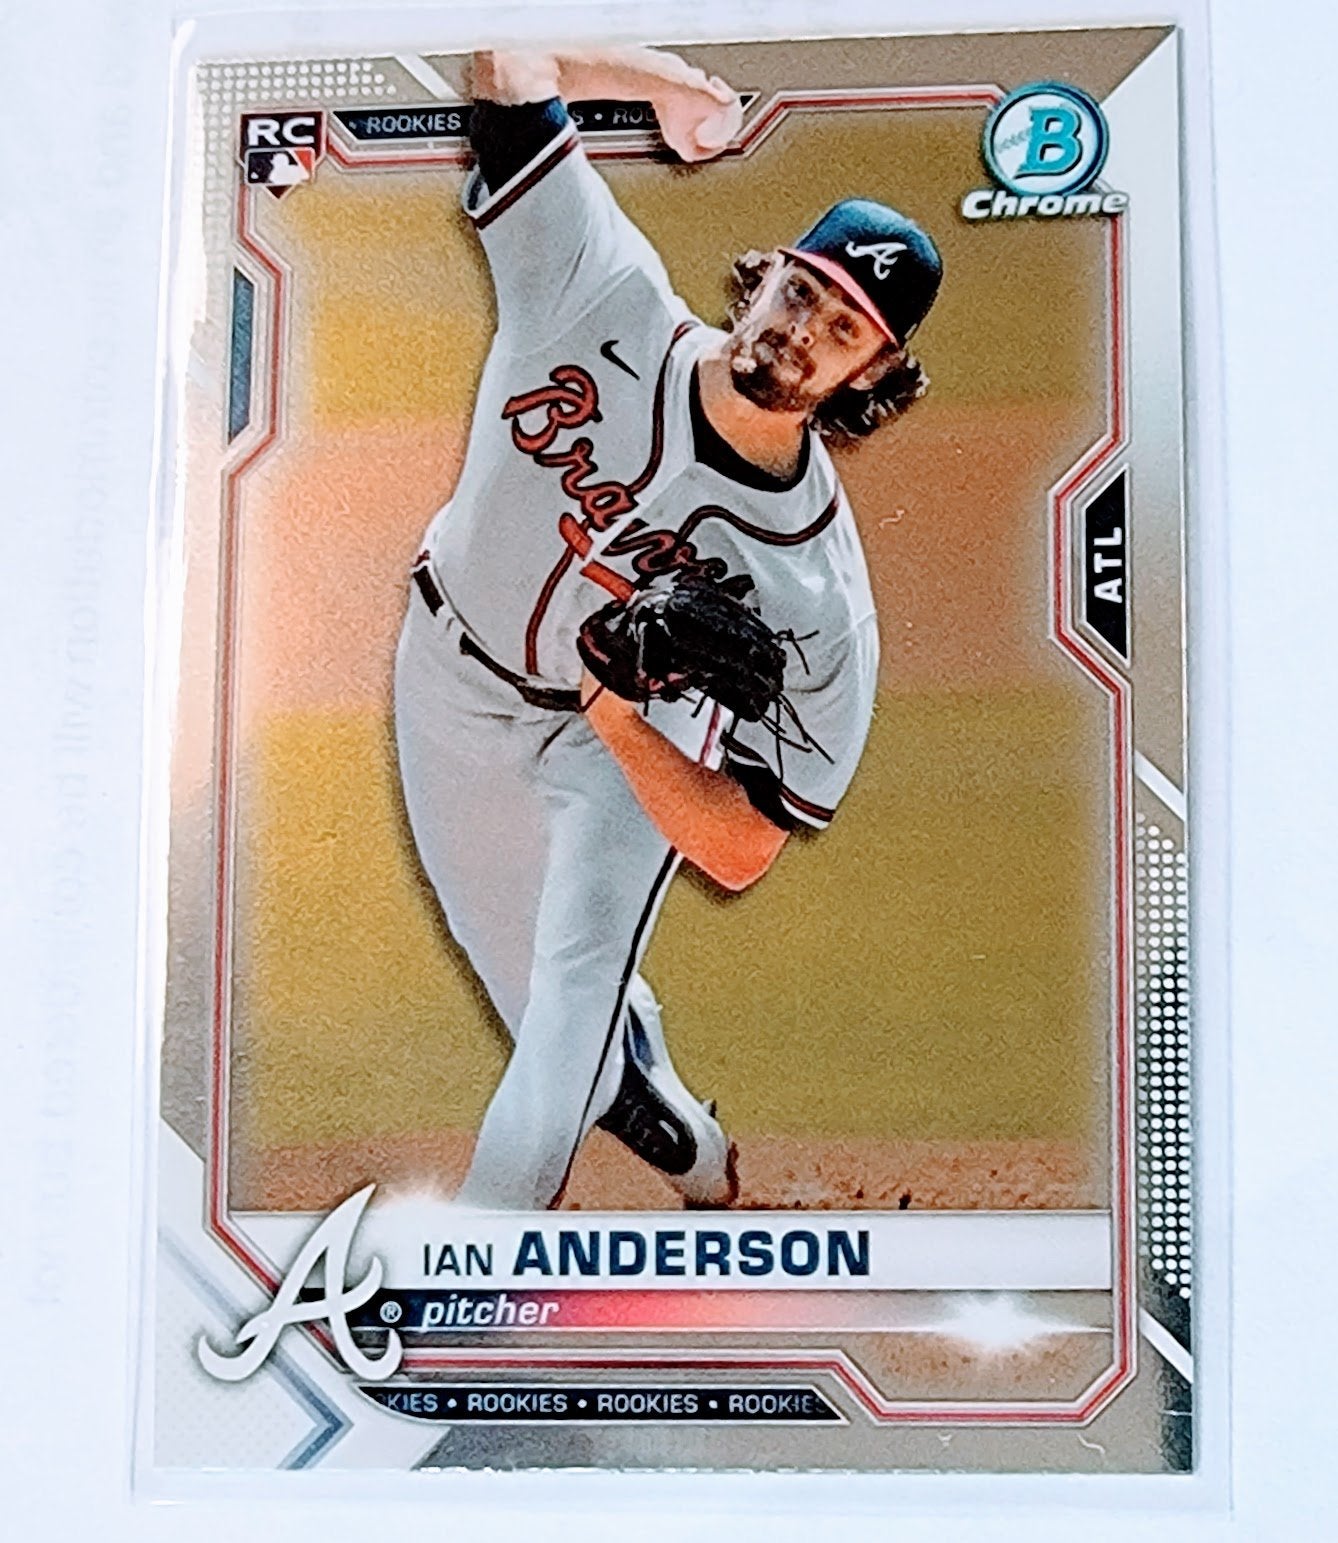 2021 Bowman Chrome Ian Anderson Rookie Baseball Card SMCB1 simple Xclusive Collectibles   